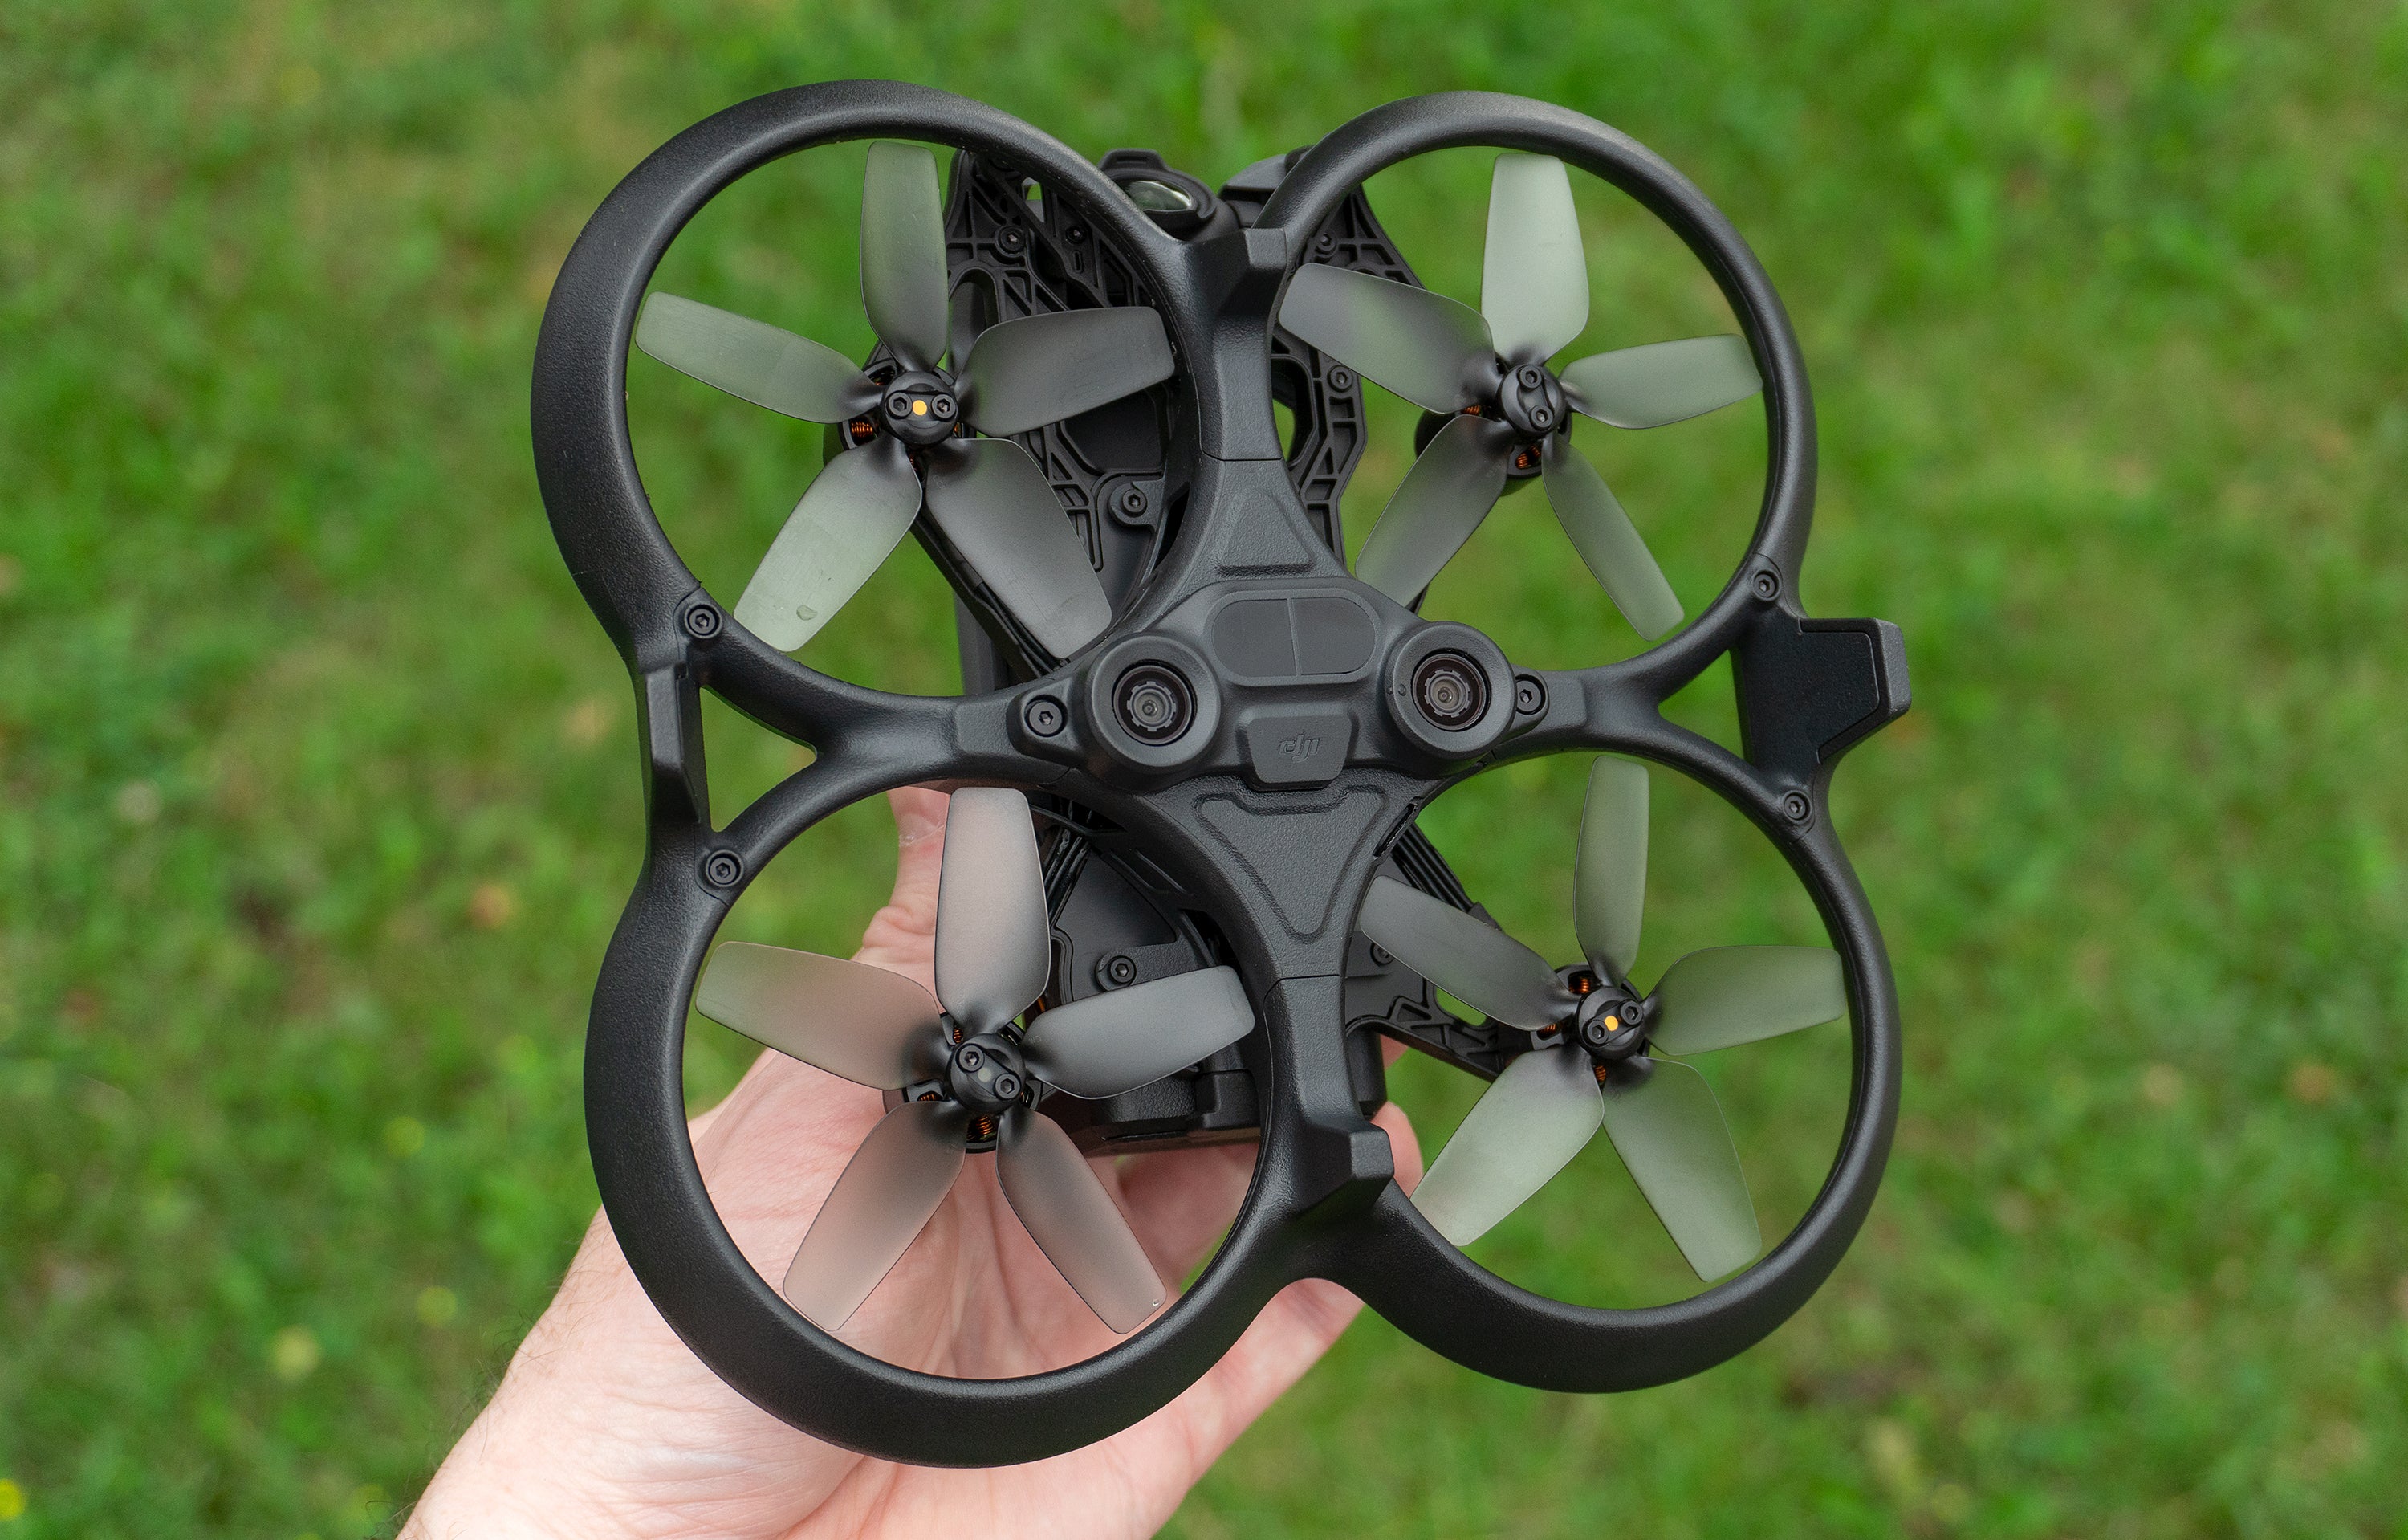 Downward-facing cameras and infrared sensors allow the DJI Avata to detect what it's flying over to ensure safe landings. (Photo: Andrew Liszewski | Gizmodo)